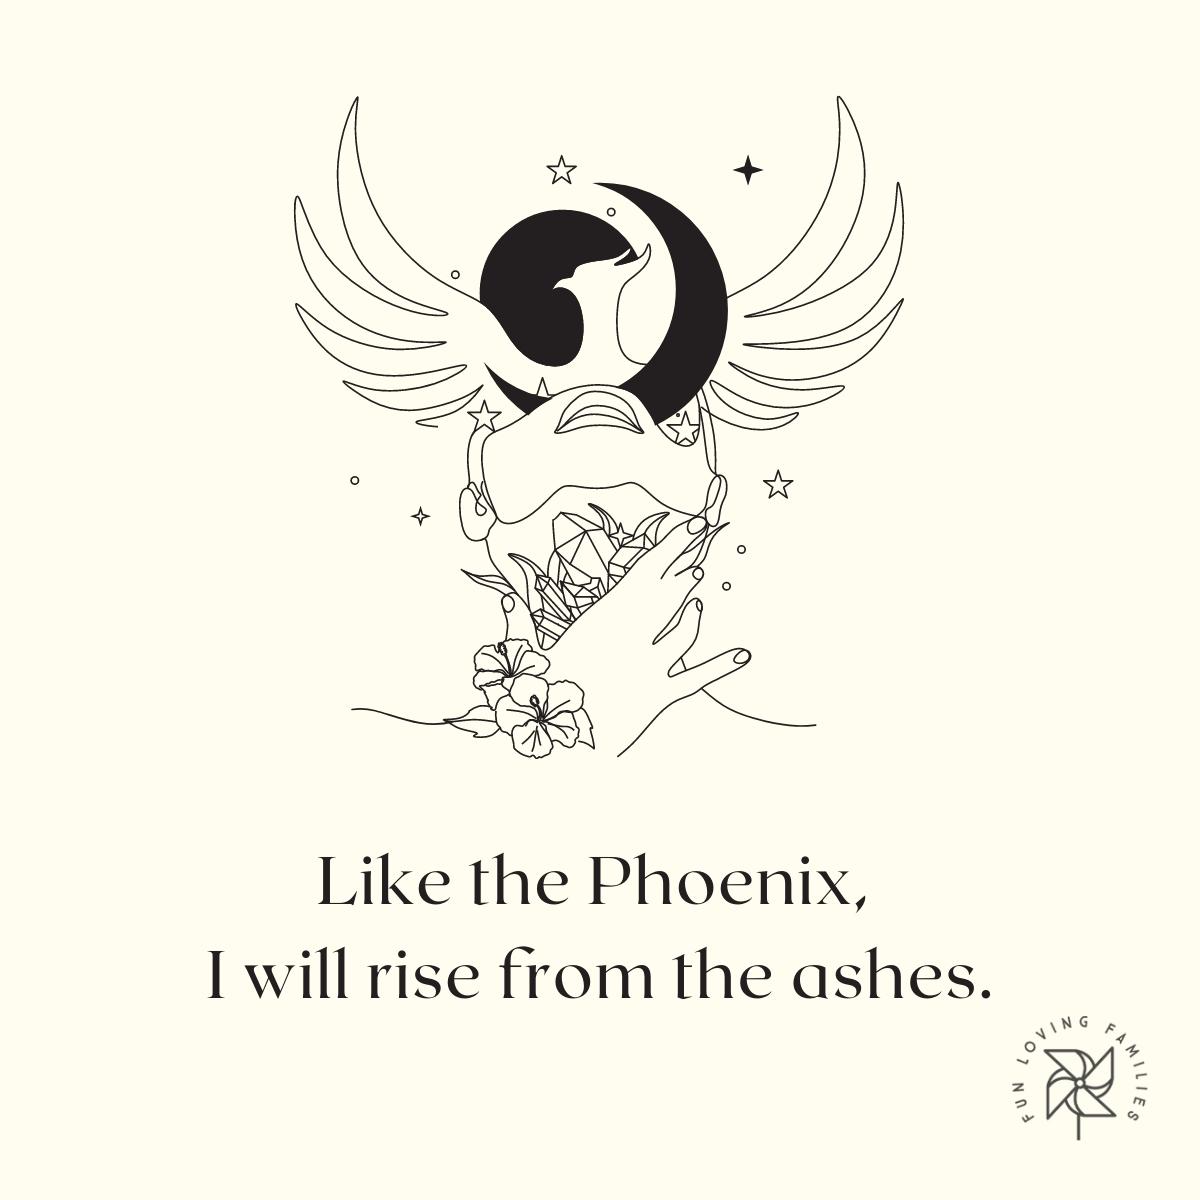 Like the Phoenix, I will rise from the ashes affirmation